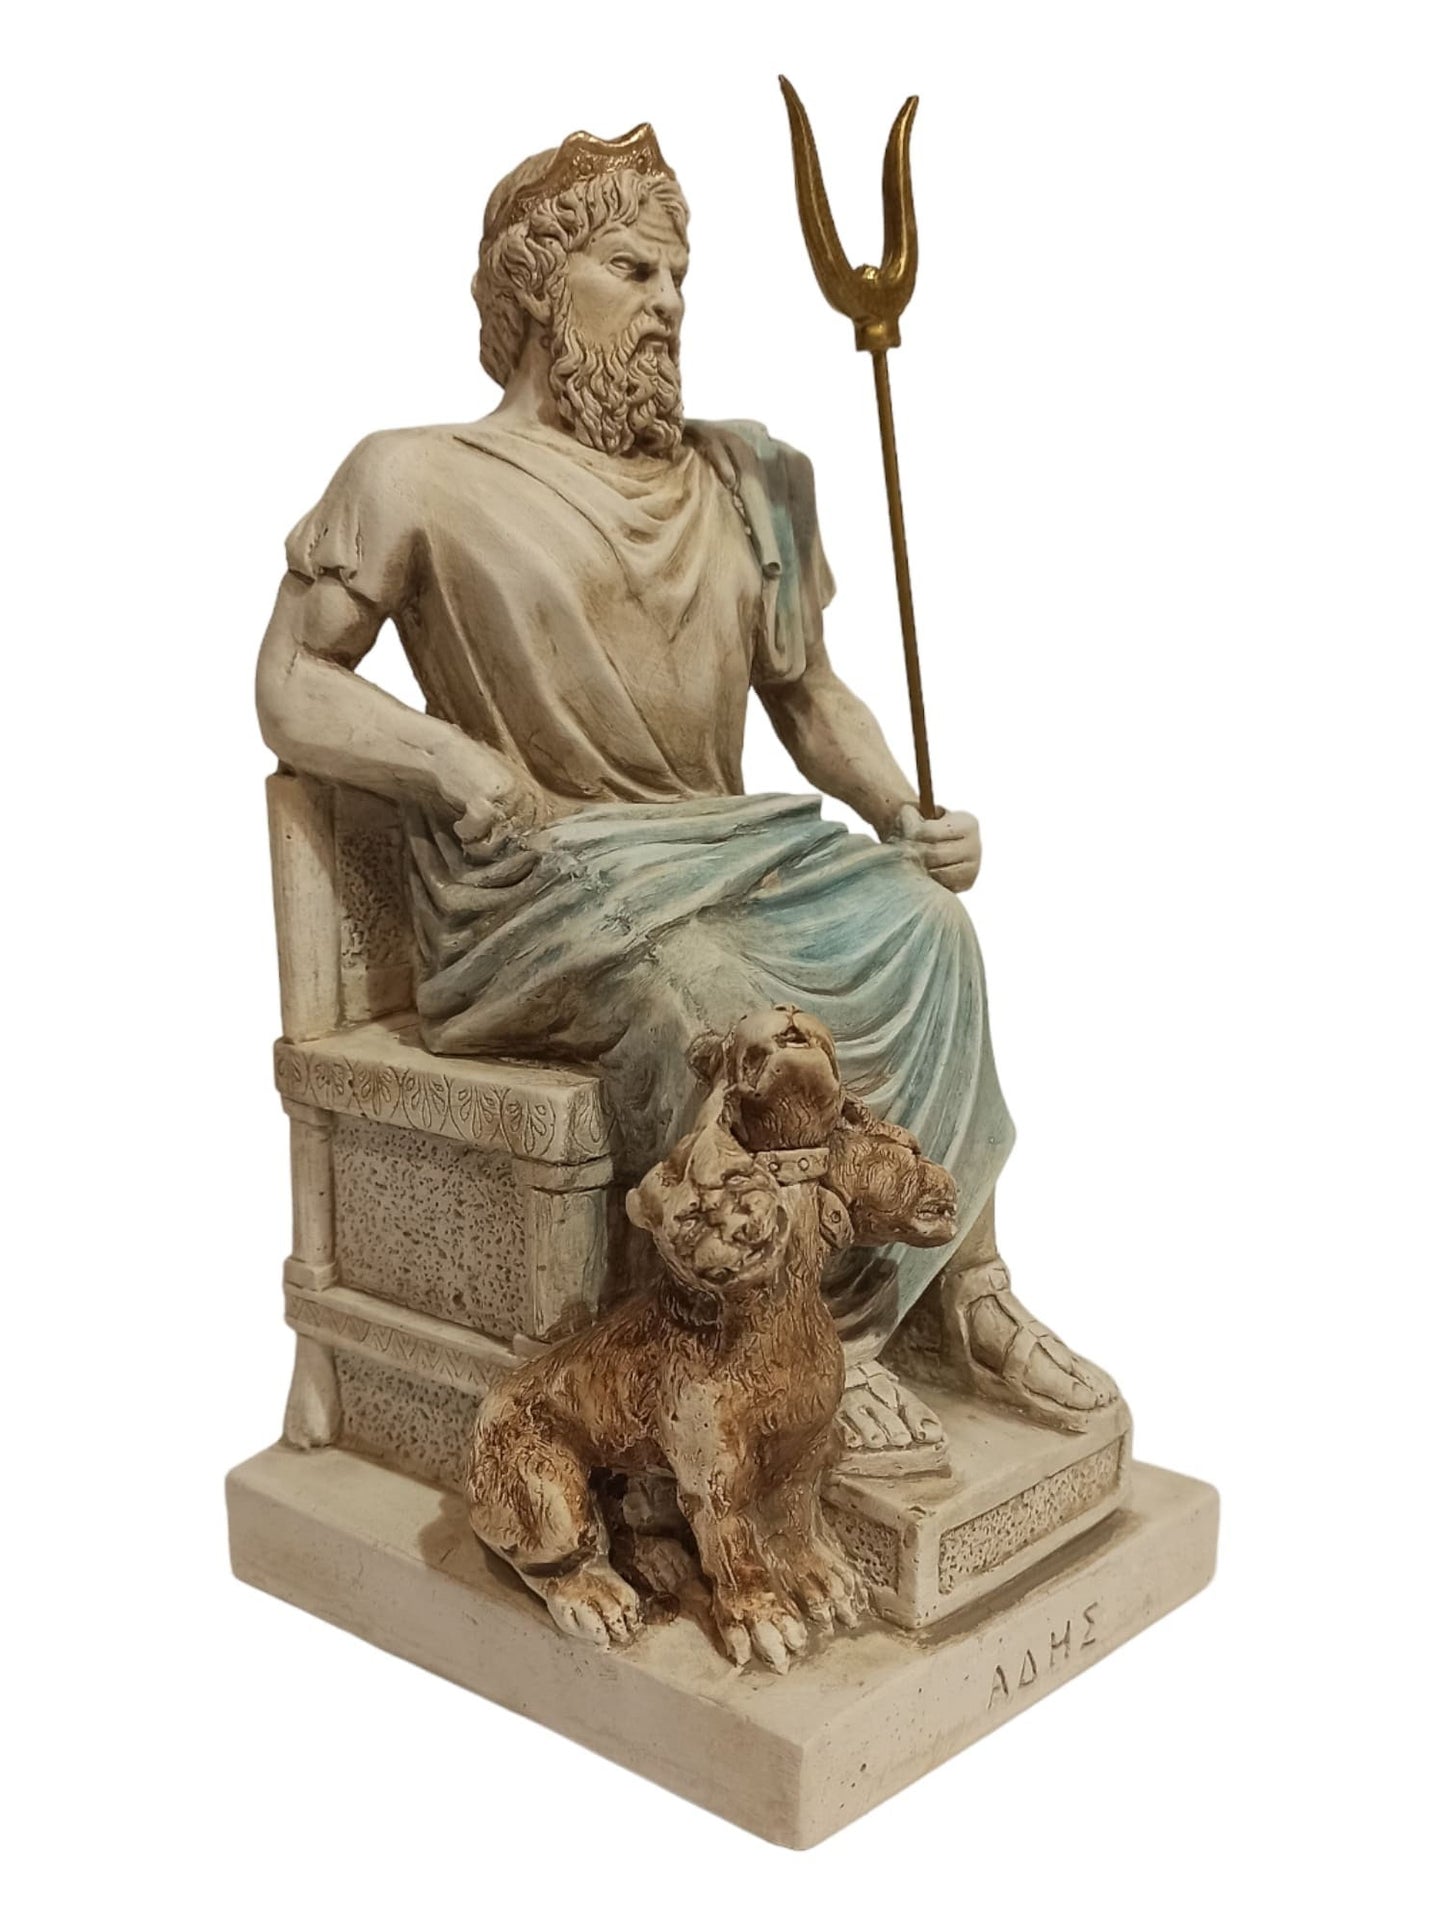 Hades and Cerberus - Greek Roman God of the Dead, King of the Underworld - Three-Headed Dog Guarding the Gates - Casting Stone